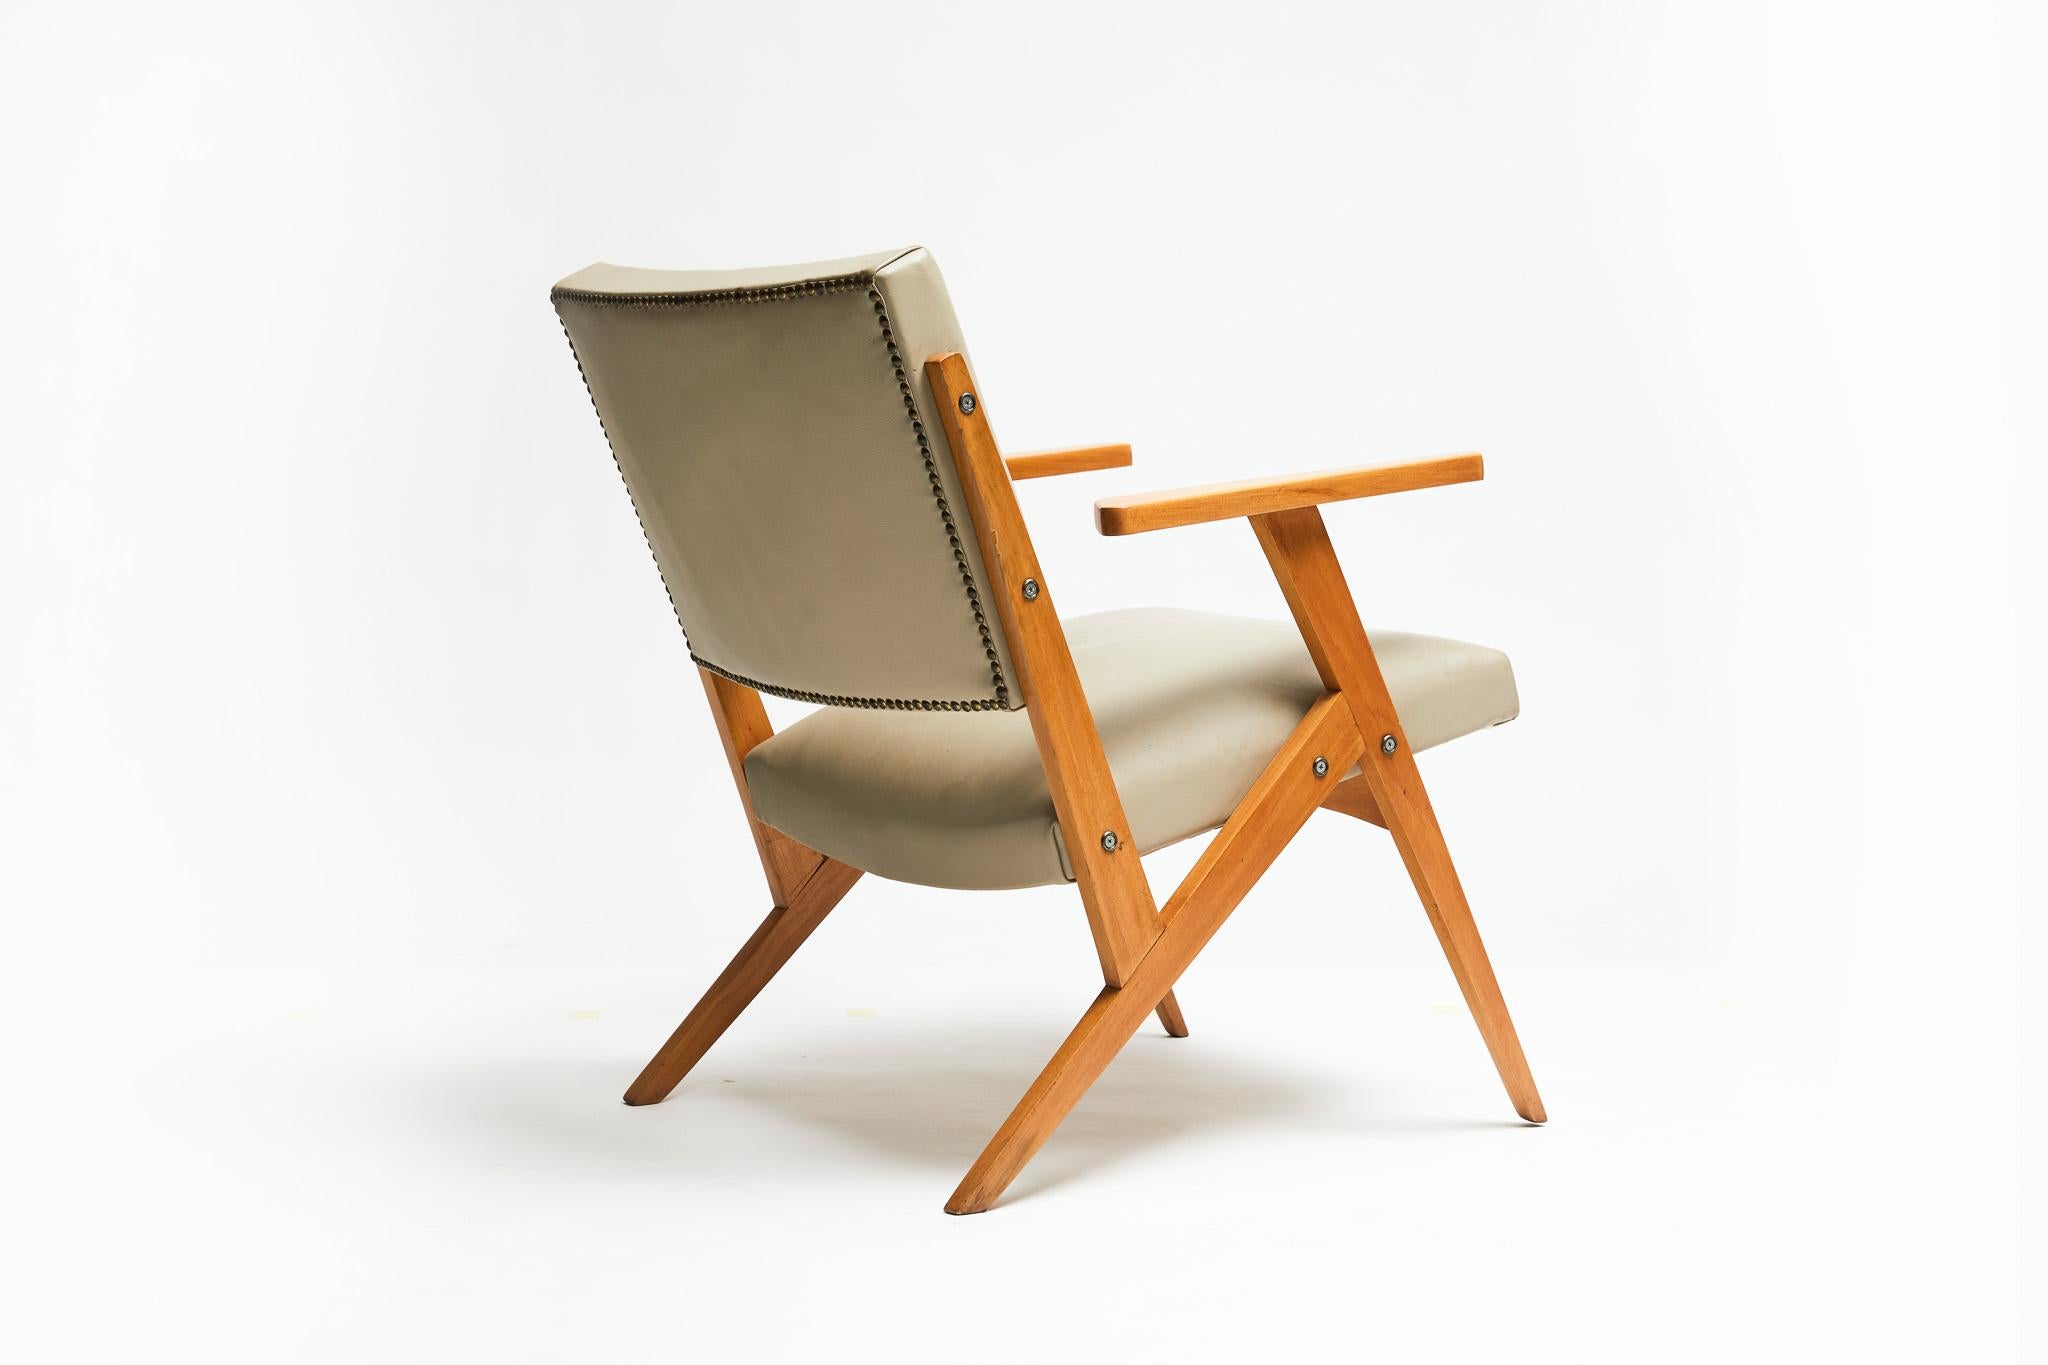 Hand-Carved Brazilian Modern Armchair in Wood & Mint Faux Leather, Jose Zanine Caldas, 1950s For Sale